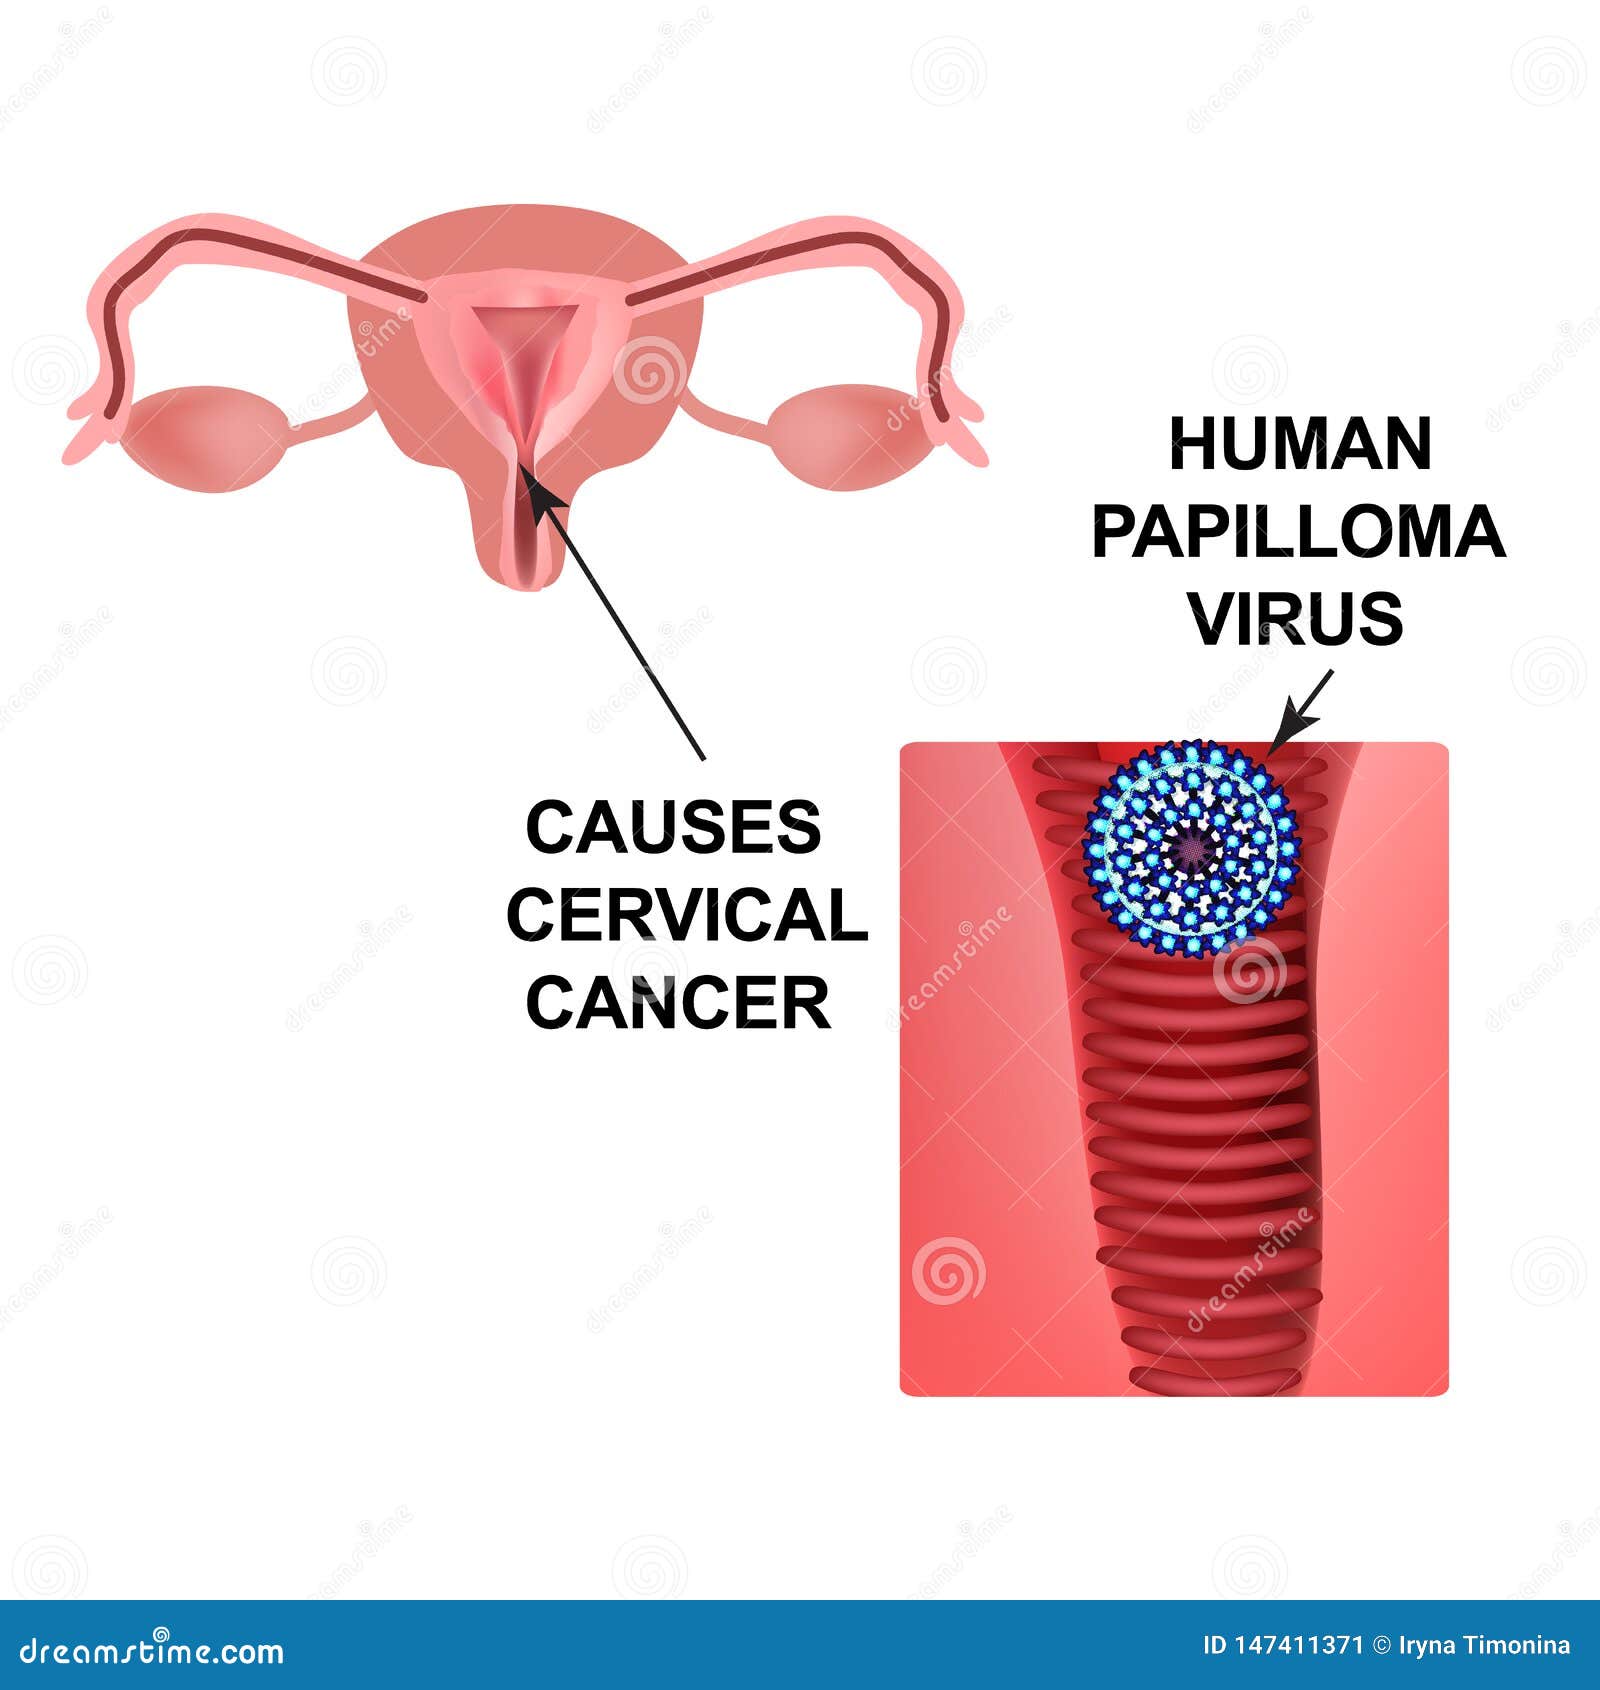 Squamous papilloma causes, High risk hpv causes cancer